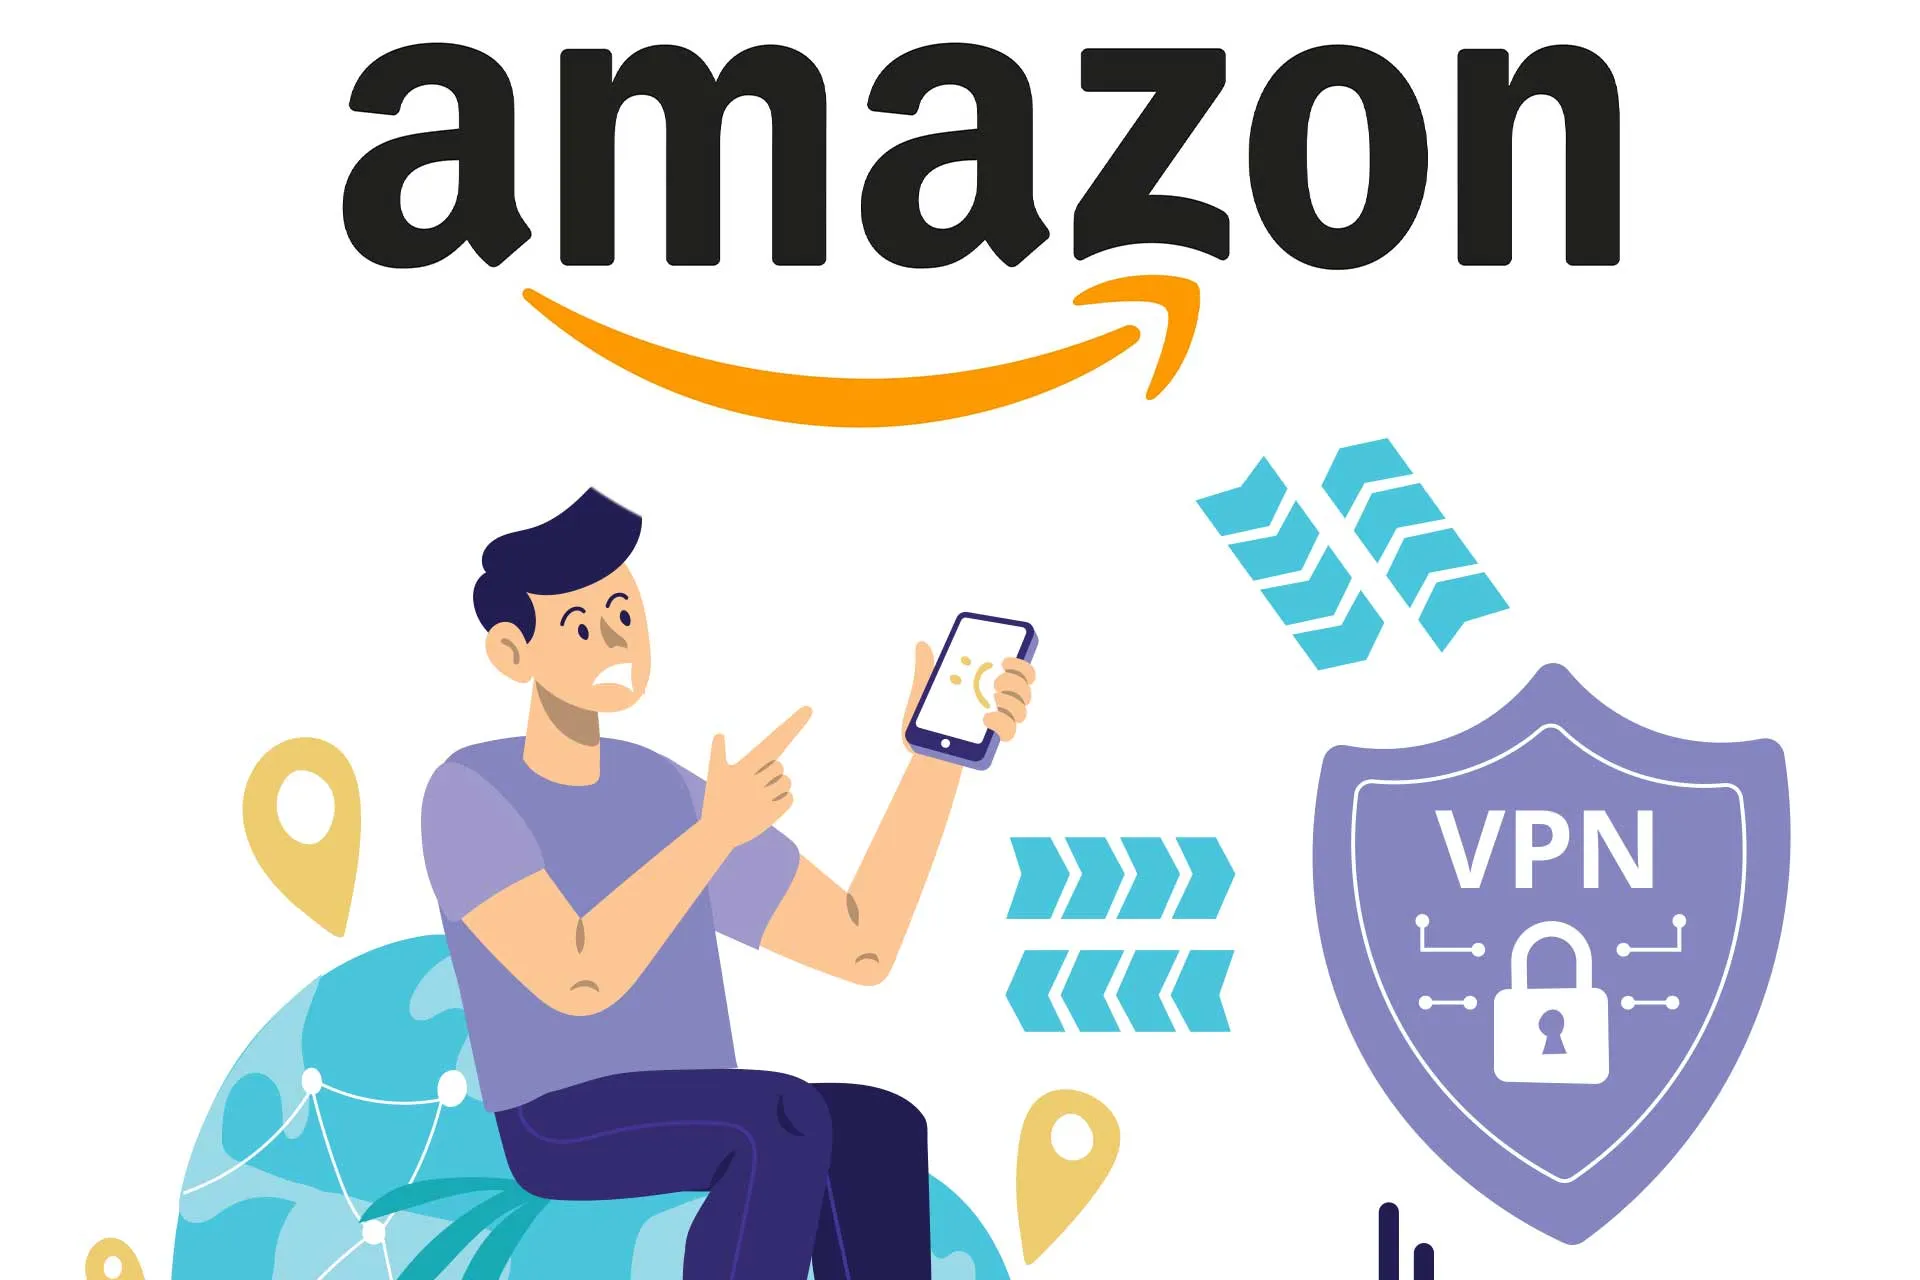 How Does Amazon Know I Am Using a VPN